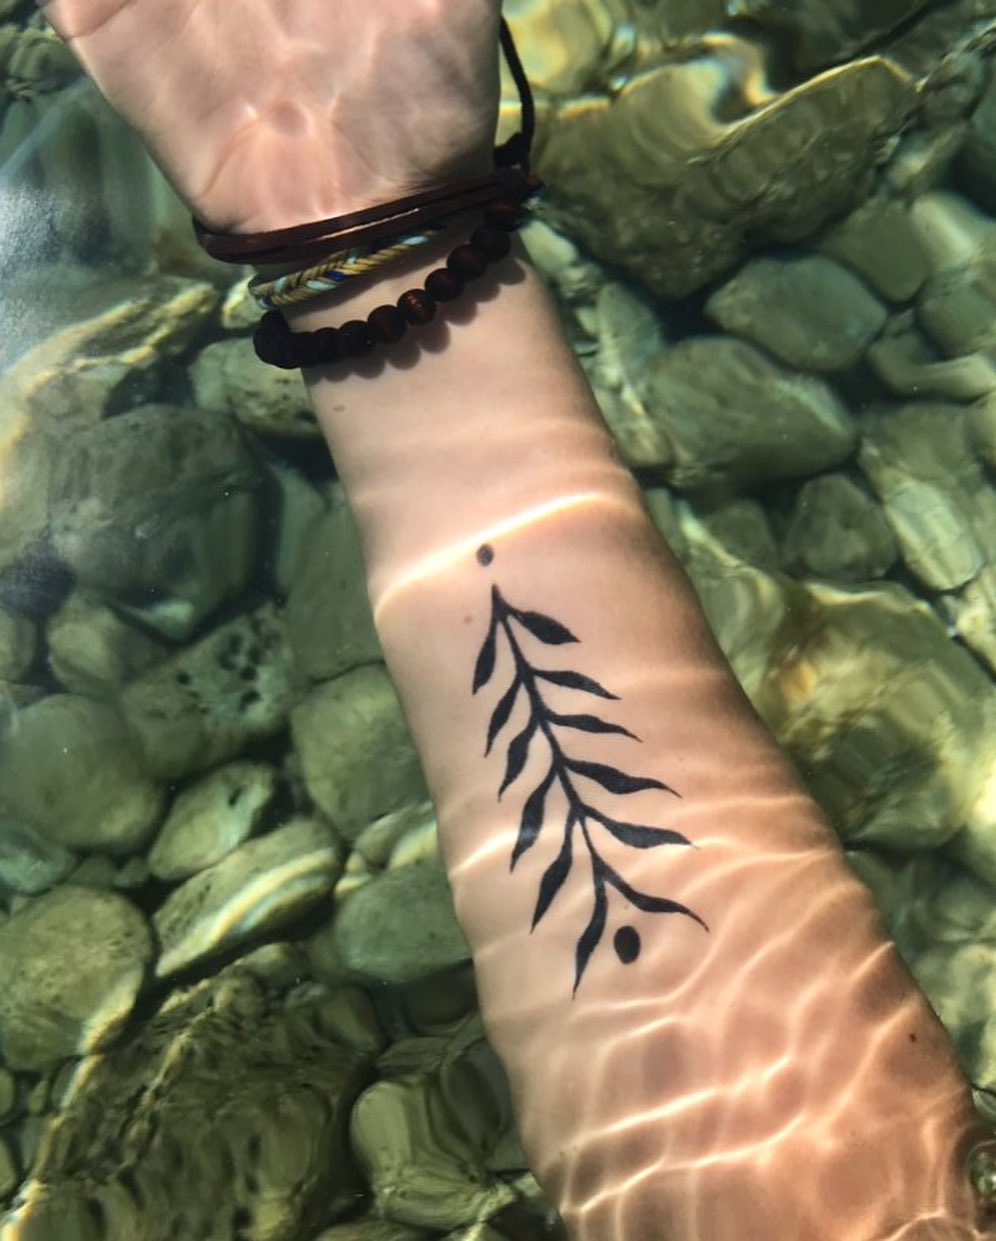 Just a simple leaf tattoo is all you need to rock. It’s not a small one but this medium-size leaf tattoo is perfect. Show your love of sea with it.